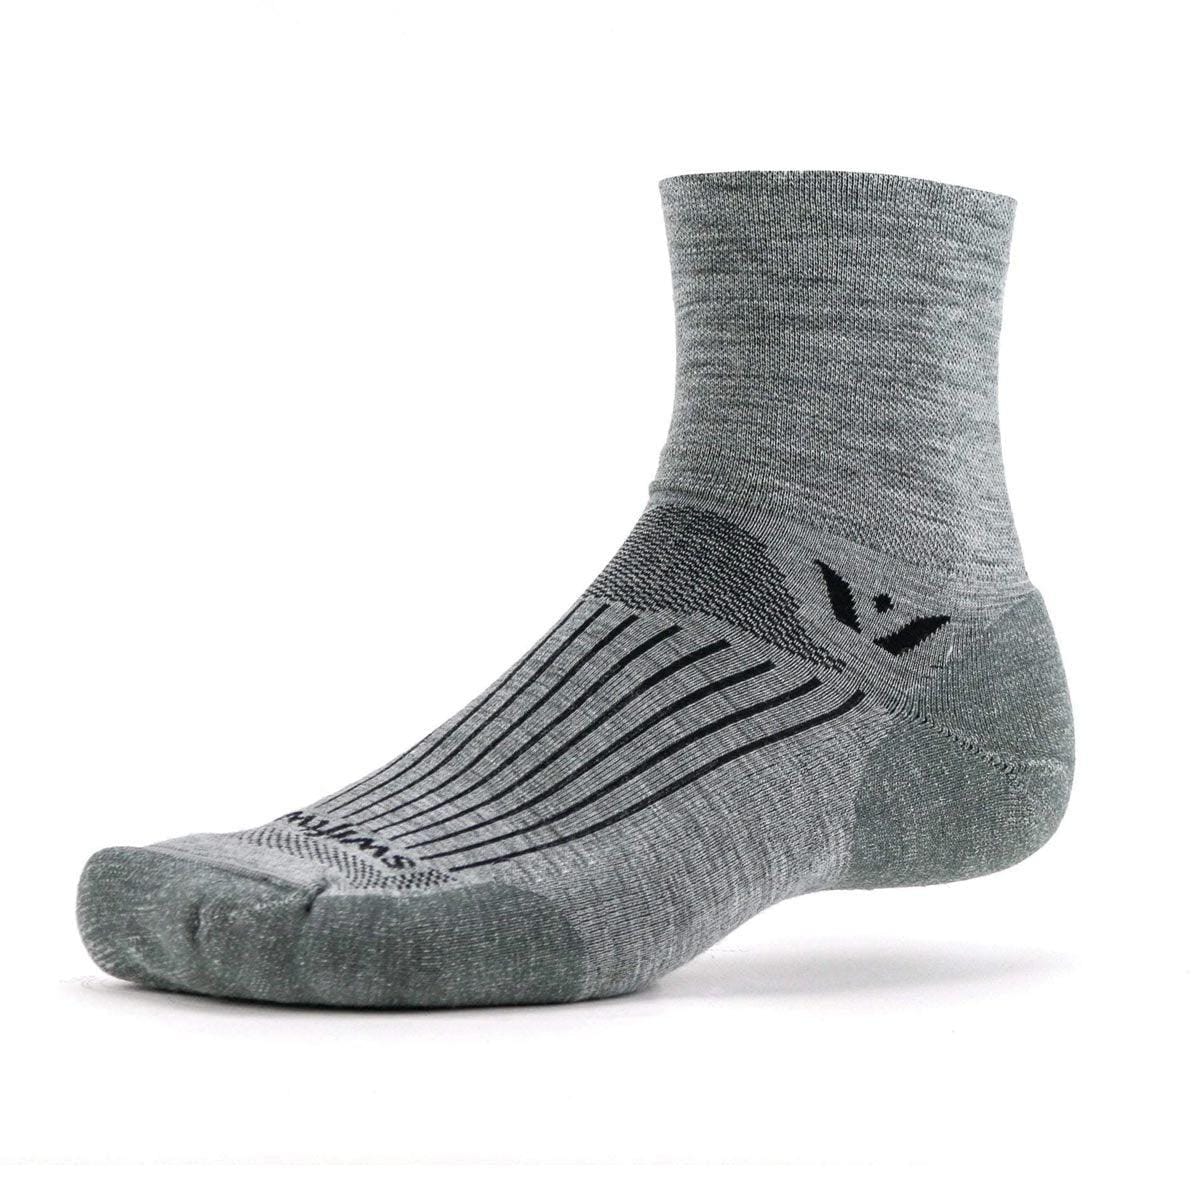 Swiftwick PURSUIT Four Heather / Small Apparel - Clothing - Socks